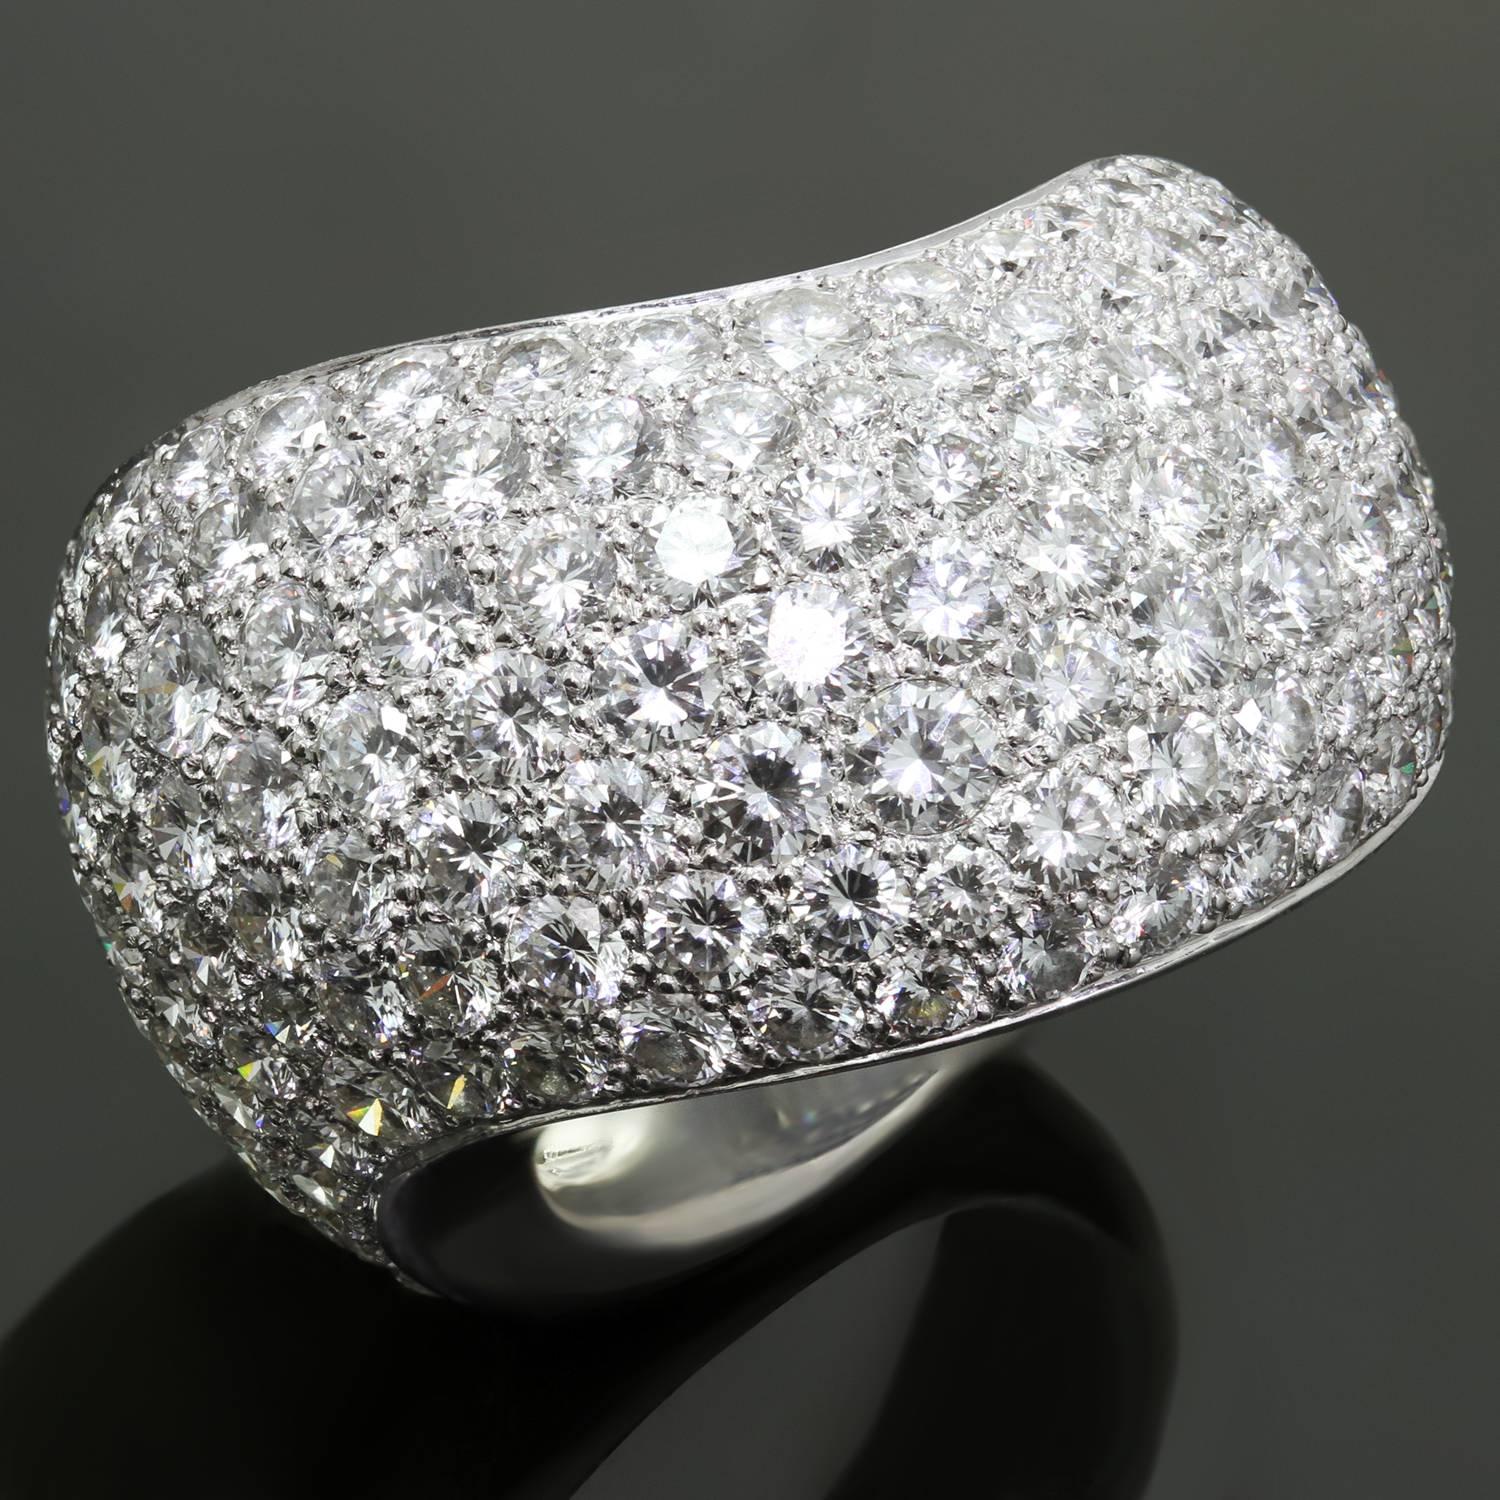 This gorgeous ring from Cartier's Paris Nouvelle Vague collection features a wide slightly swirling band crafted in 18k white gold and pave-set with exquisite brilliant-cut round diamonds of an estimated 5.0 carats. Made in France circa 1999.